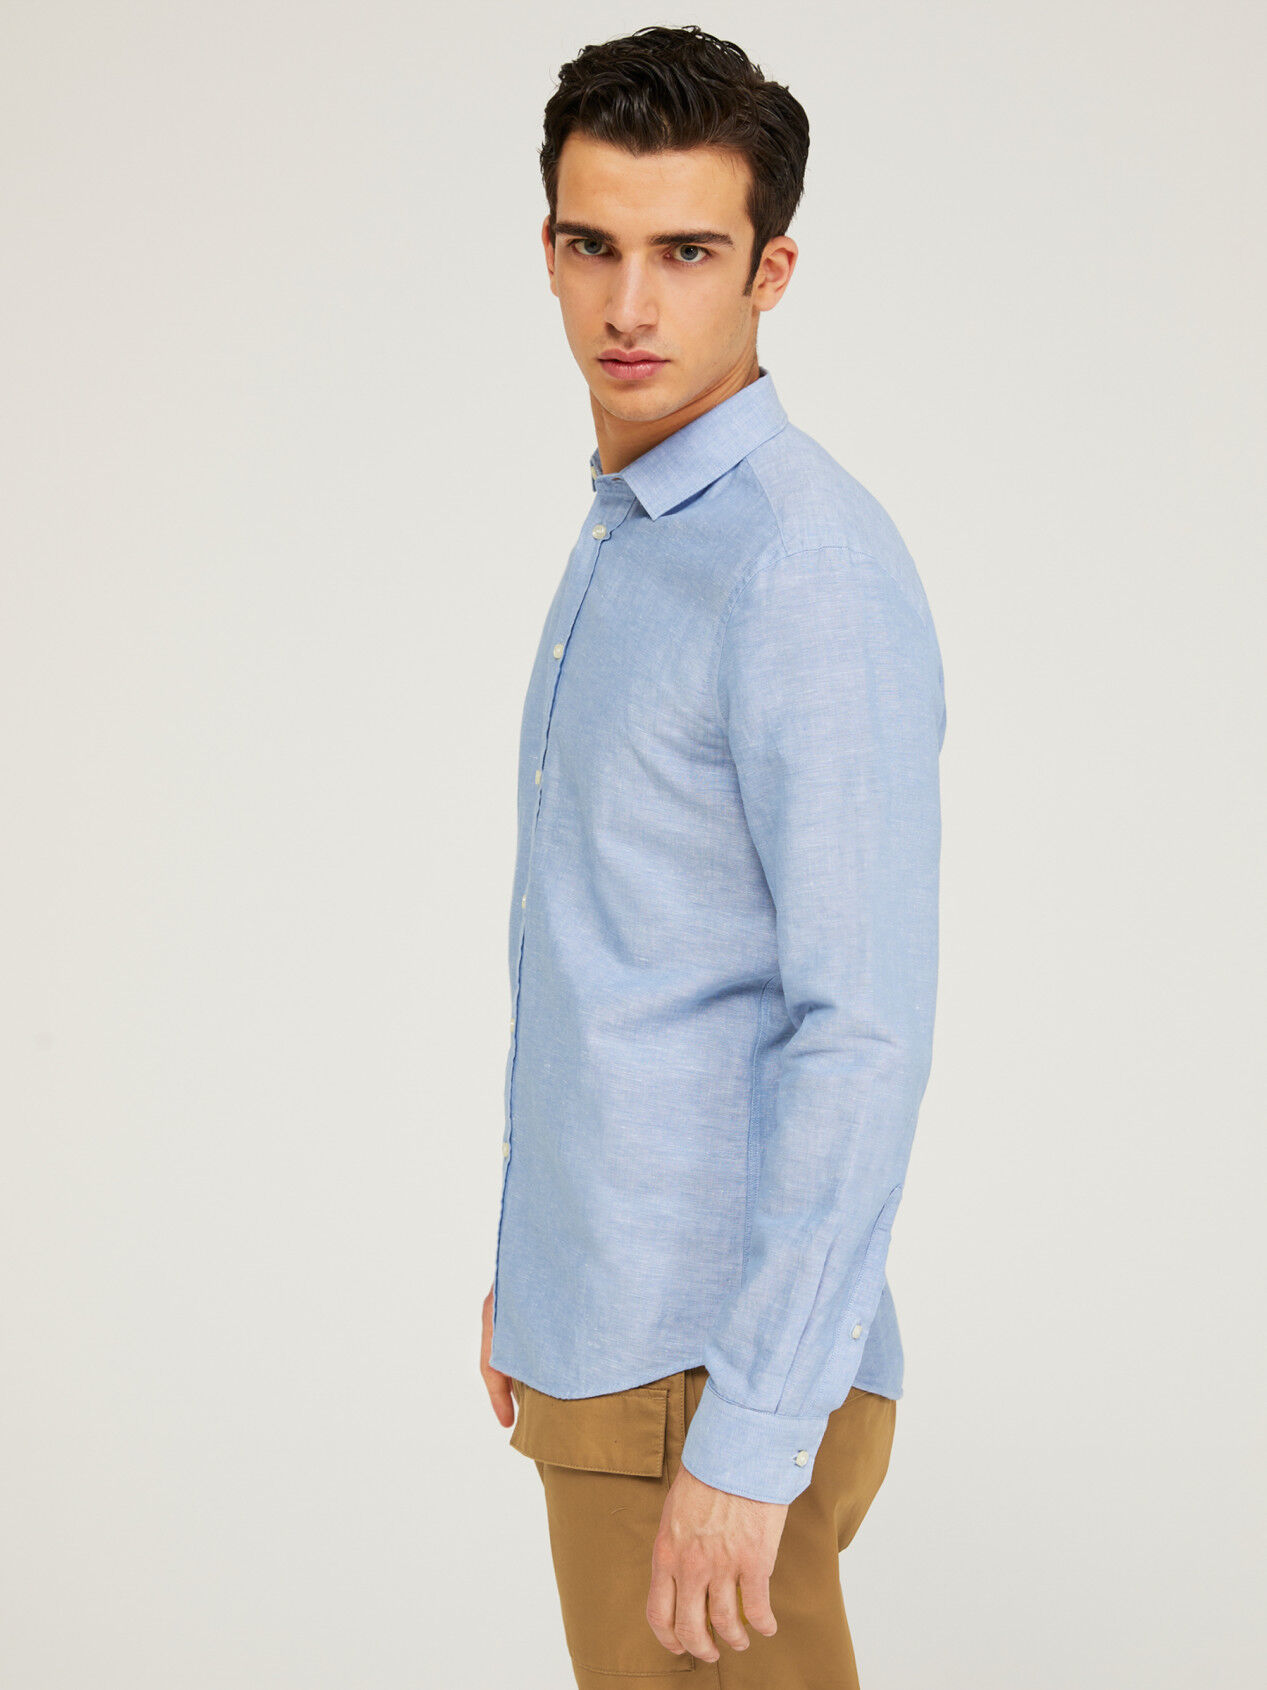 Shirt in cotton and linen